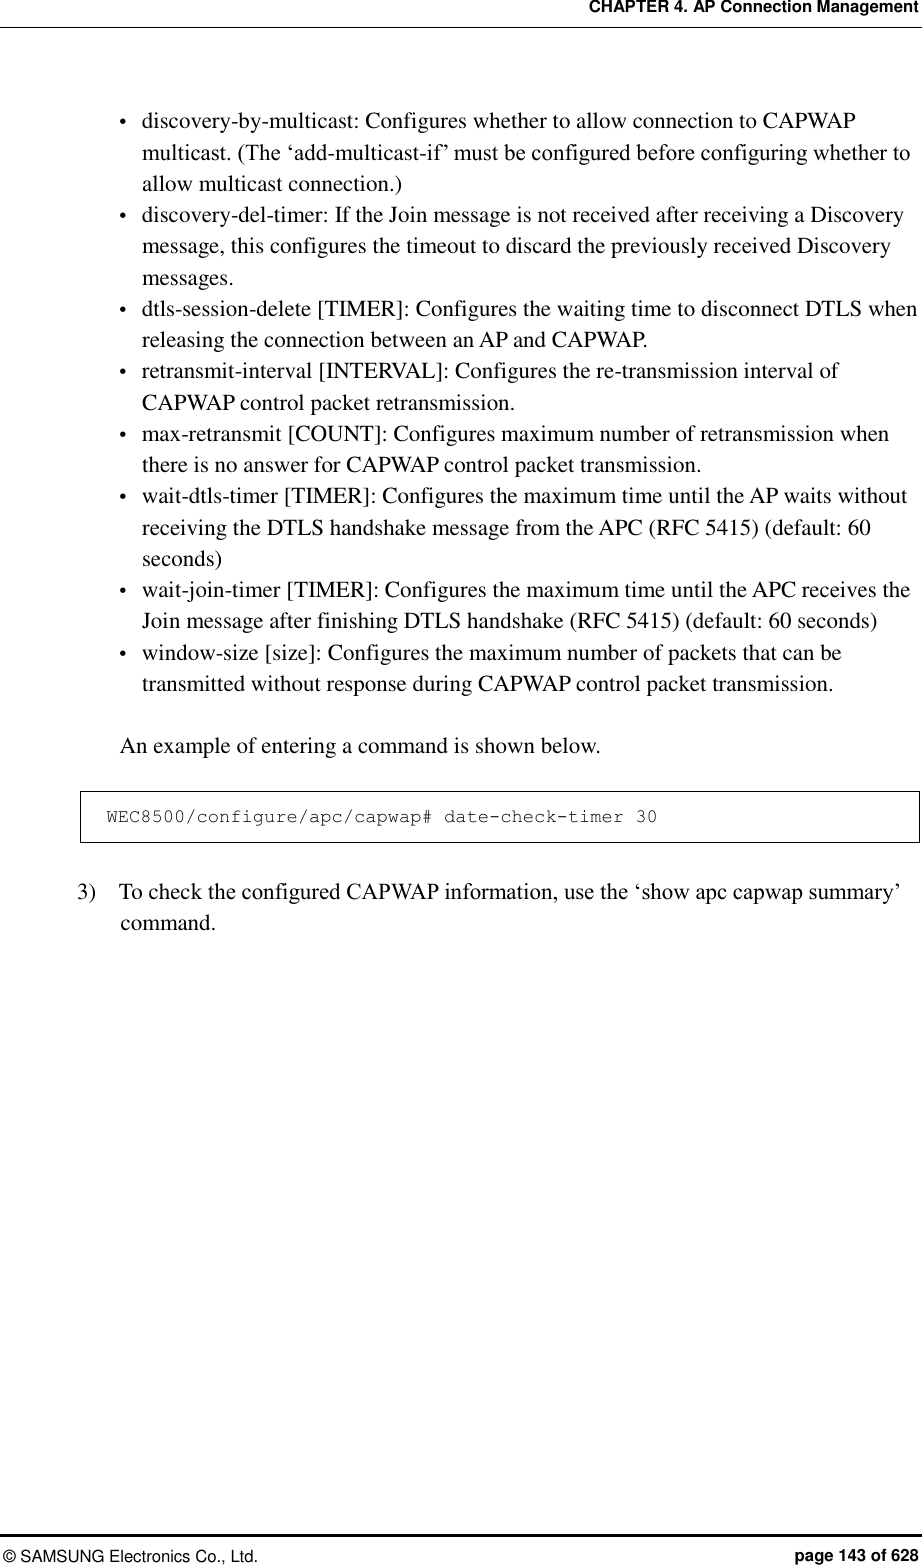 CHAPTER 4. AP Connection Management ©  SAMSUNG Electronics Co., Ltd.  page 143 of 628  discovery-by-multicast: Configures whether to allow connection to CAPWAP multicast. (The ‘add-multicast-if’ must be configured before configuring whether to allow multicast connection.)  discovery-del-timer: If the Join message is not received after receiving a Discovery message, this configures the timeout to discard the previously received Discovery messages.  dtls-session-delete [TIMER]: Configures the waiting time to disconnect DTLS when releasing the connection between an AP and CAPWAP.  retransmit-interval [INTERVAL]: Configures the re-transmission interval of CAPWAP control packet retransmission.  max-retransmit [COUNT]: Configures maximum number of retransmission when there is no answer for CAPWAP control packet transmission.    wait-dtls-timer [TIMER]: Configures the maximum time until the AP waits without receiving the DTLS handshake message from the APC (RFC 5415) (default: 60 seconds)  wait-join-timer [TIMER]: Configures the maximum time until the APC receives the Join message after finishing DTLS handshake (RFC 5415) (default: 60 seconds)  window-size [size]: Configures the maximum number of packets that can be transmitted without response during CAPWAP control packet transmission.  An example of entering a command is shown below.  WEC8500/configure/apc/capwap# date-check-timer 30  3)    To check the configured CAPWAP information, use the ‘show apc capwap summary’ command.  